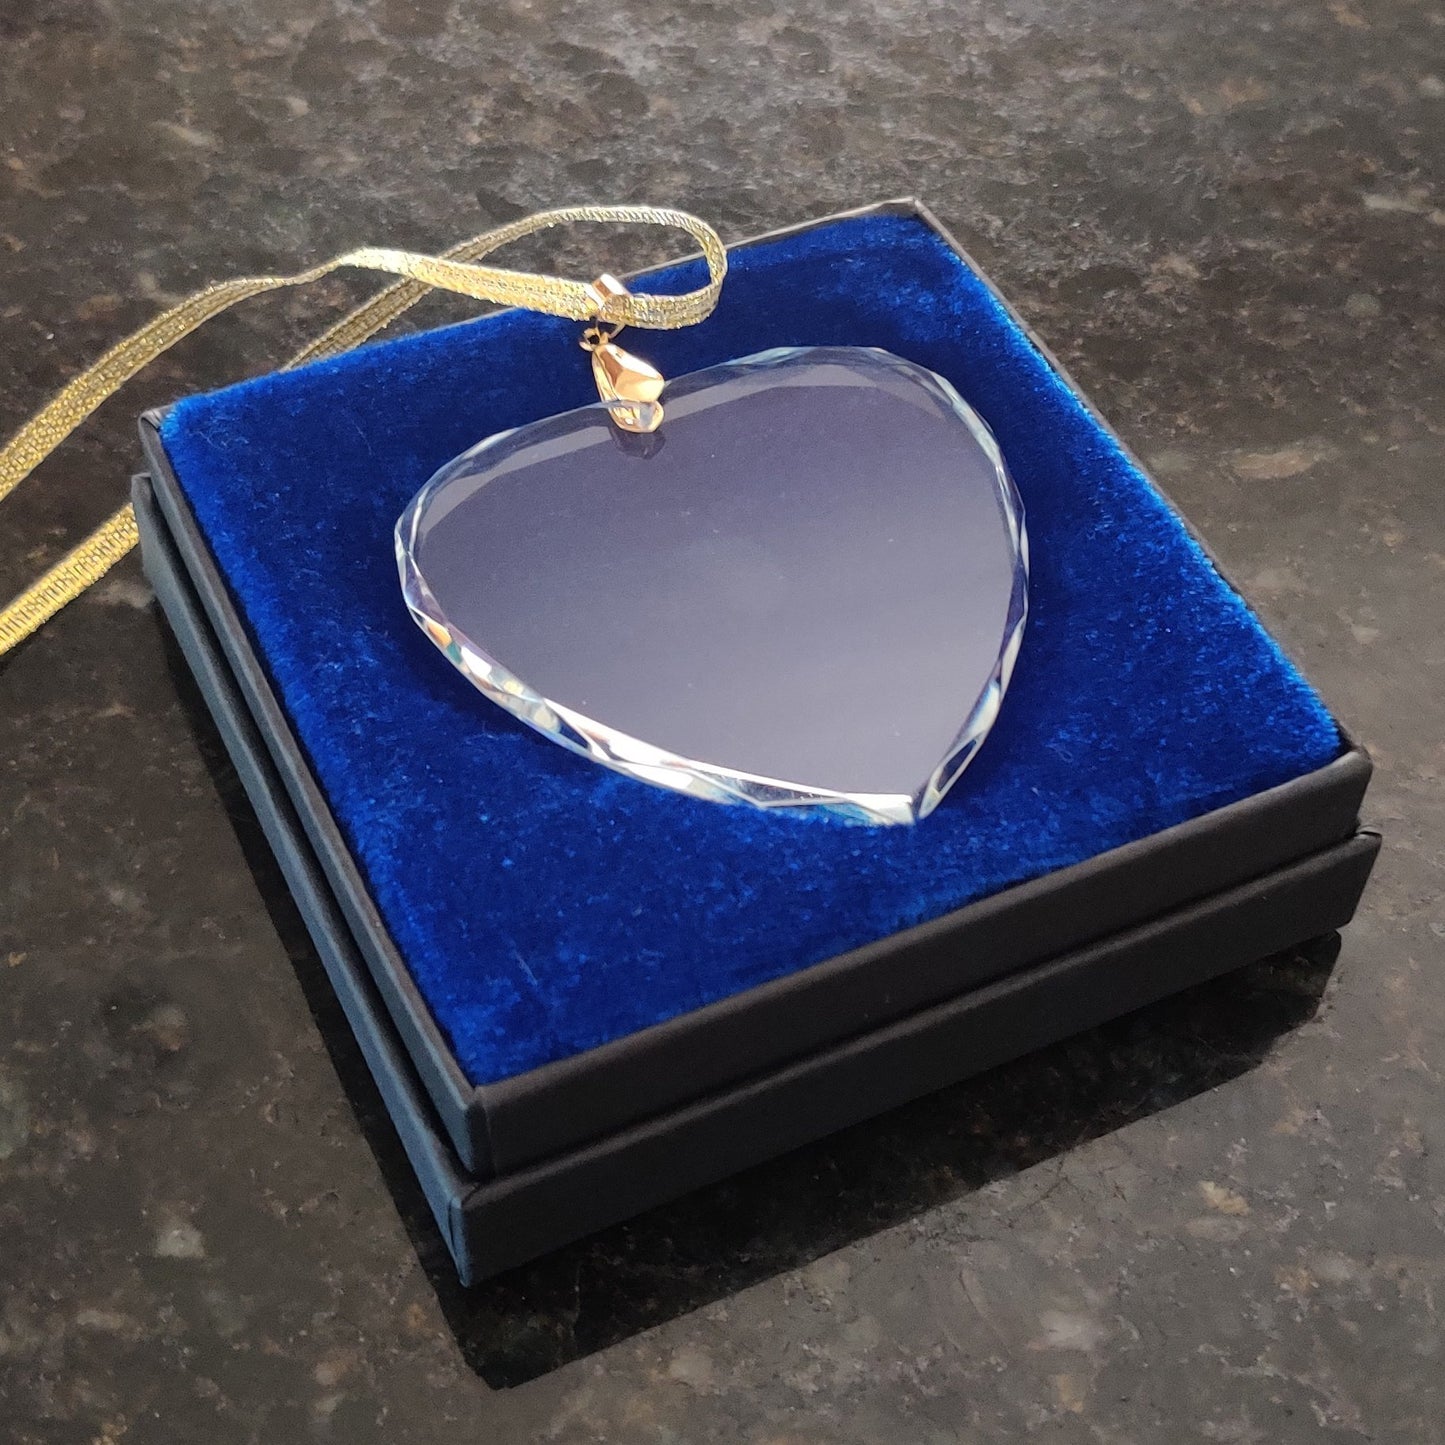 LaserGram Christmas Ornament, Plumbing, Personalized Engraving Included (Heart Shape)